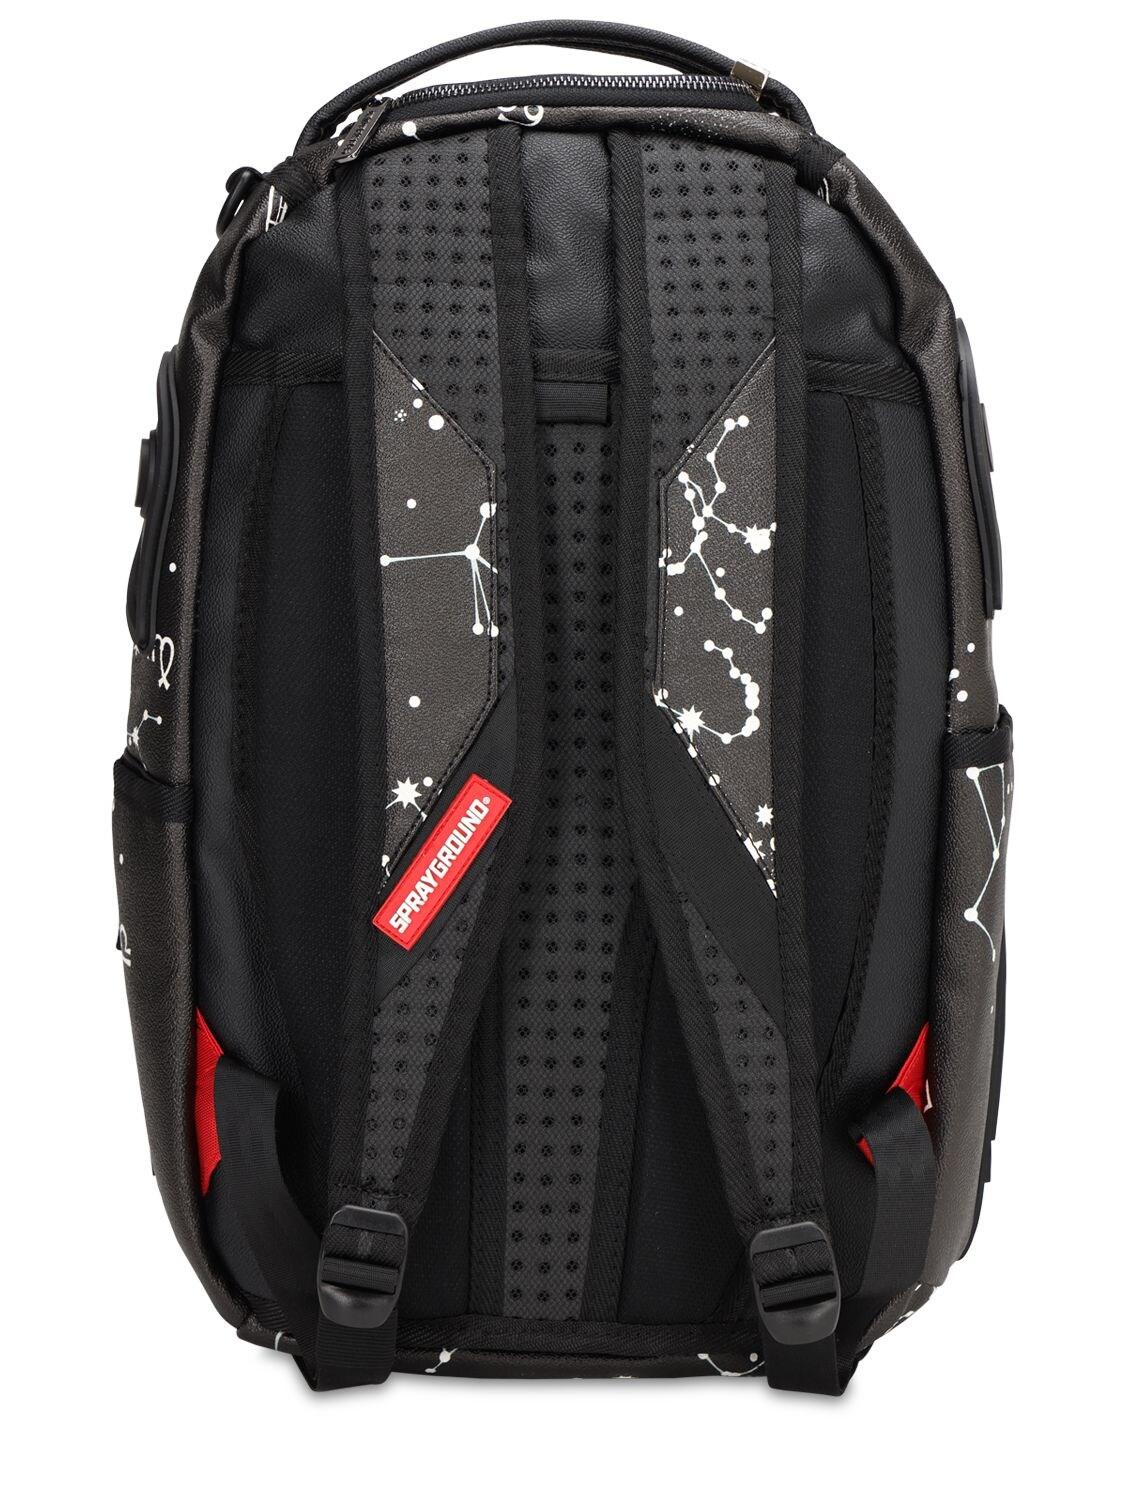 Sprayground Rubber Sharkstellation Faux Leather Backpack in Black for Men - Lyst